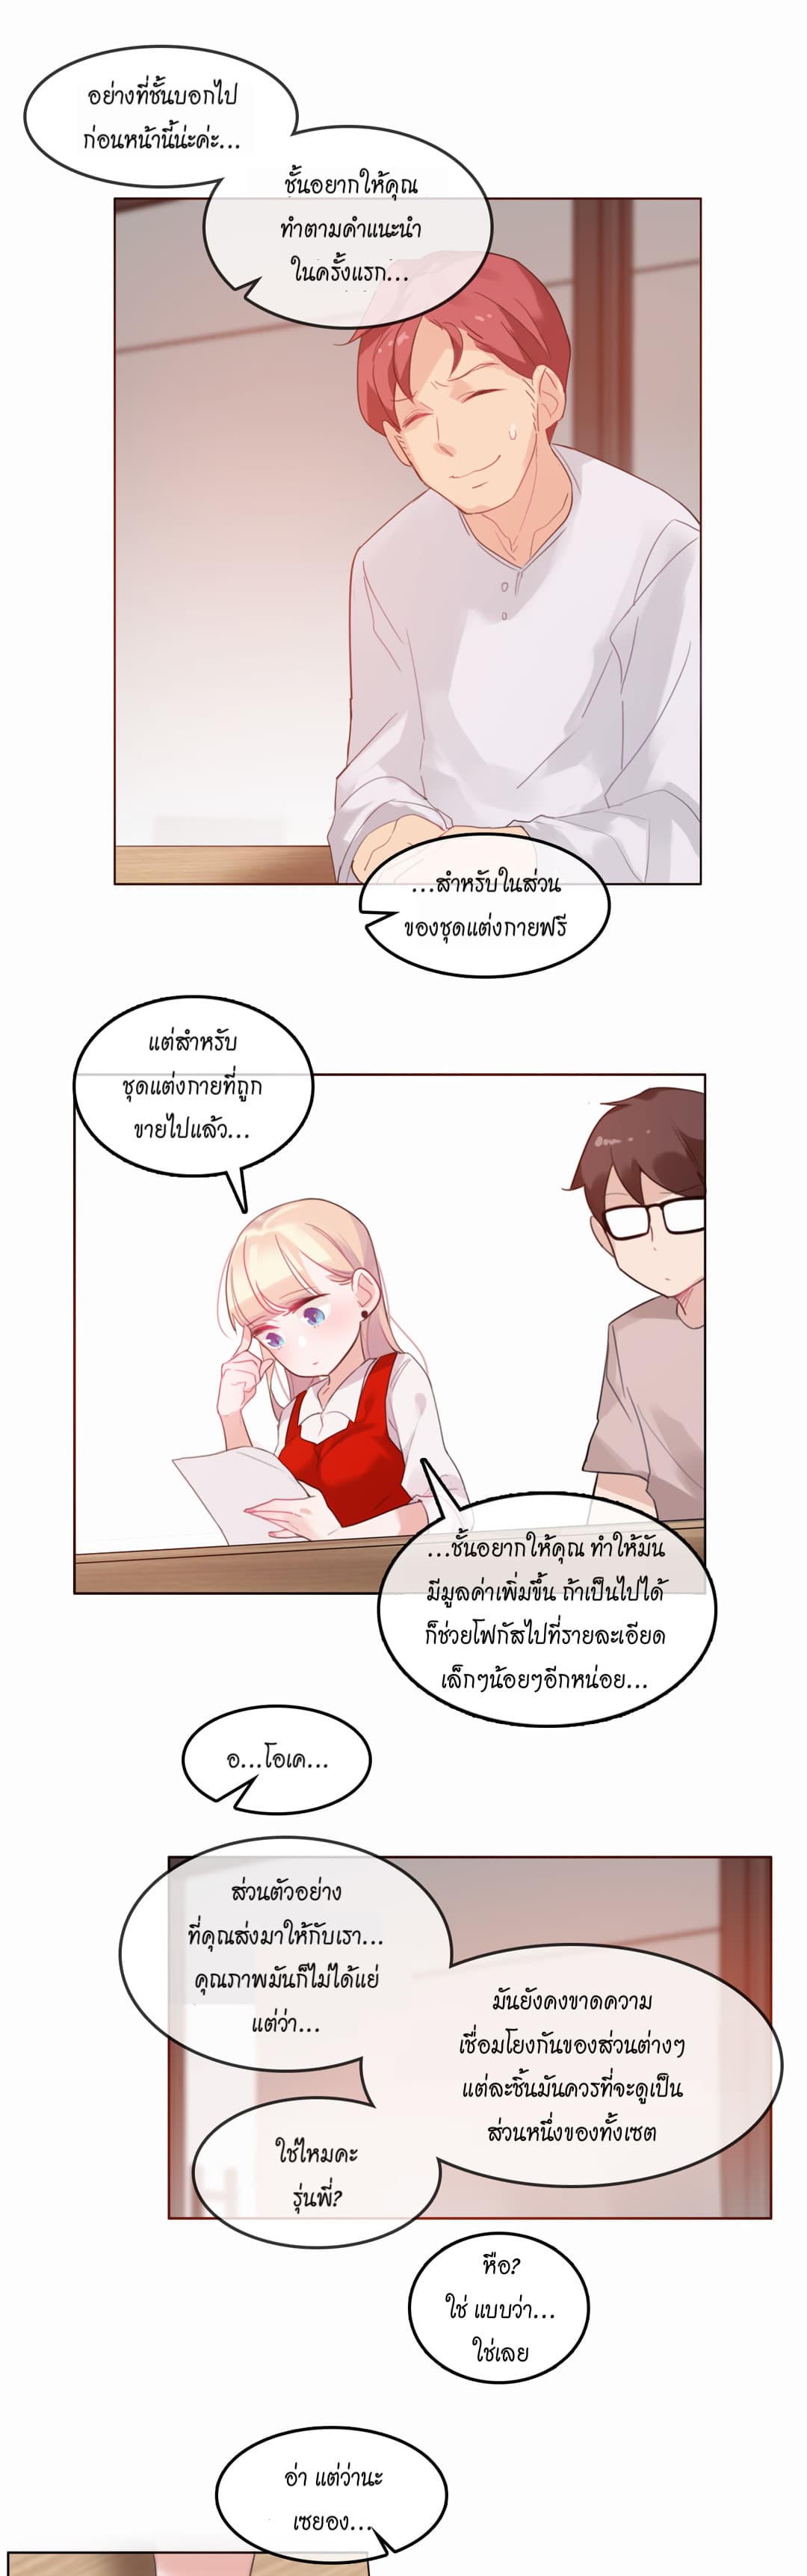 A Pervert’s Daily Life 22 (19)